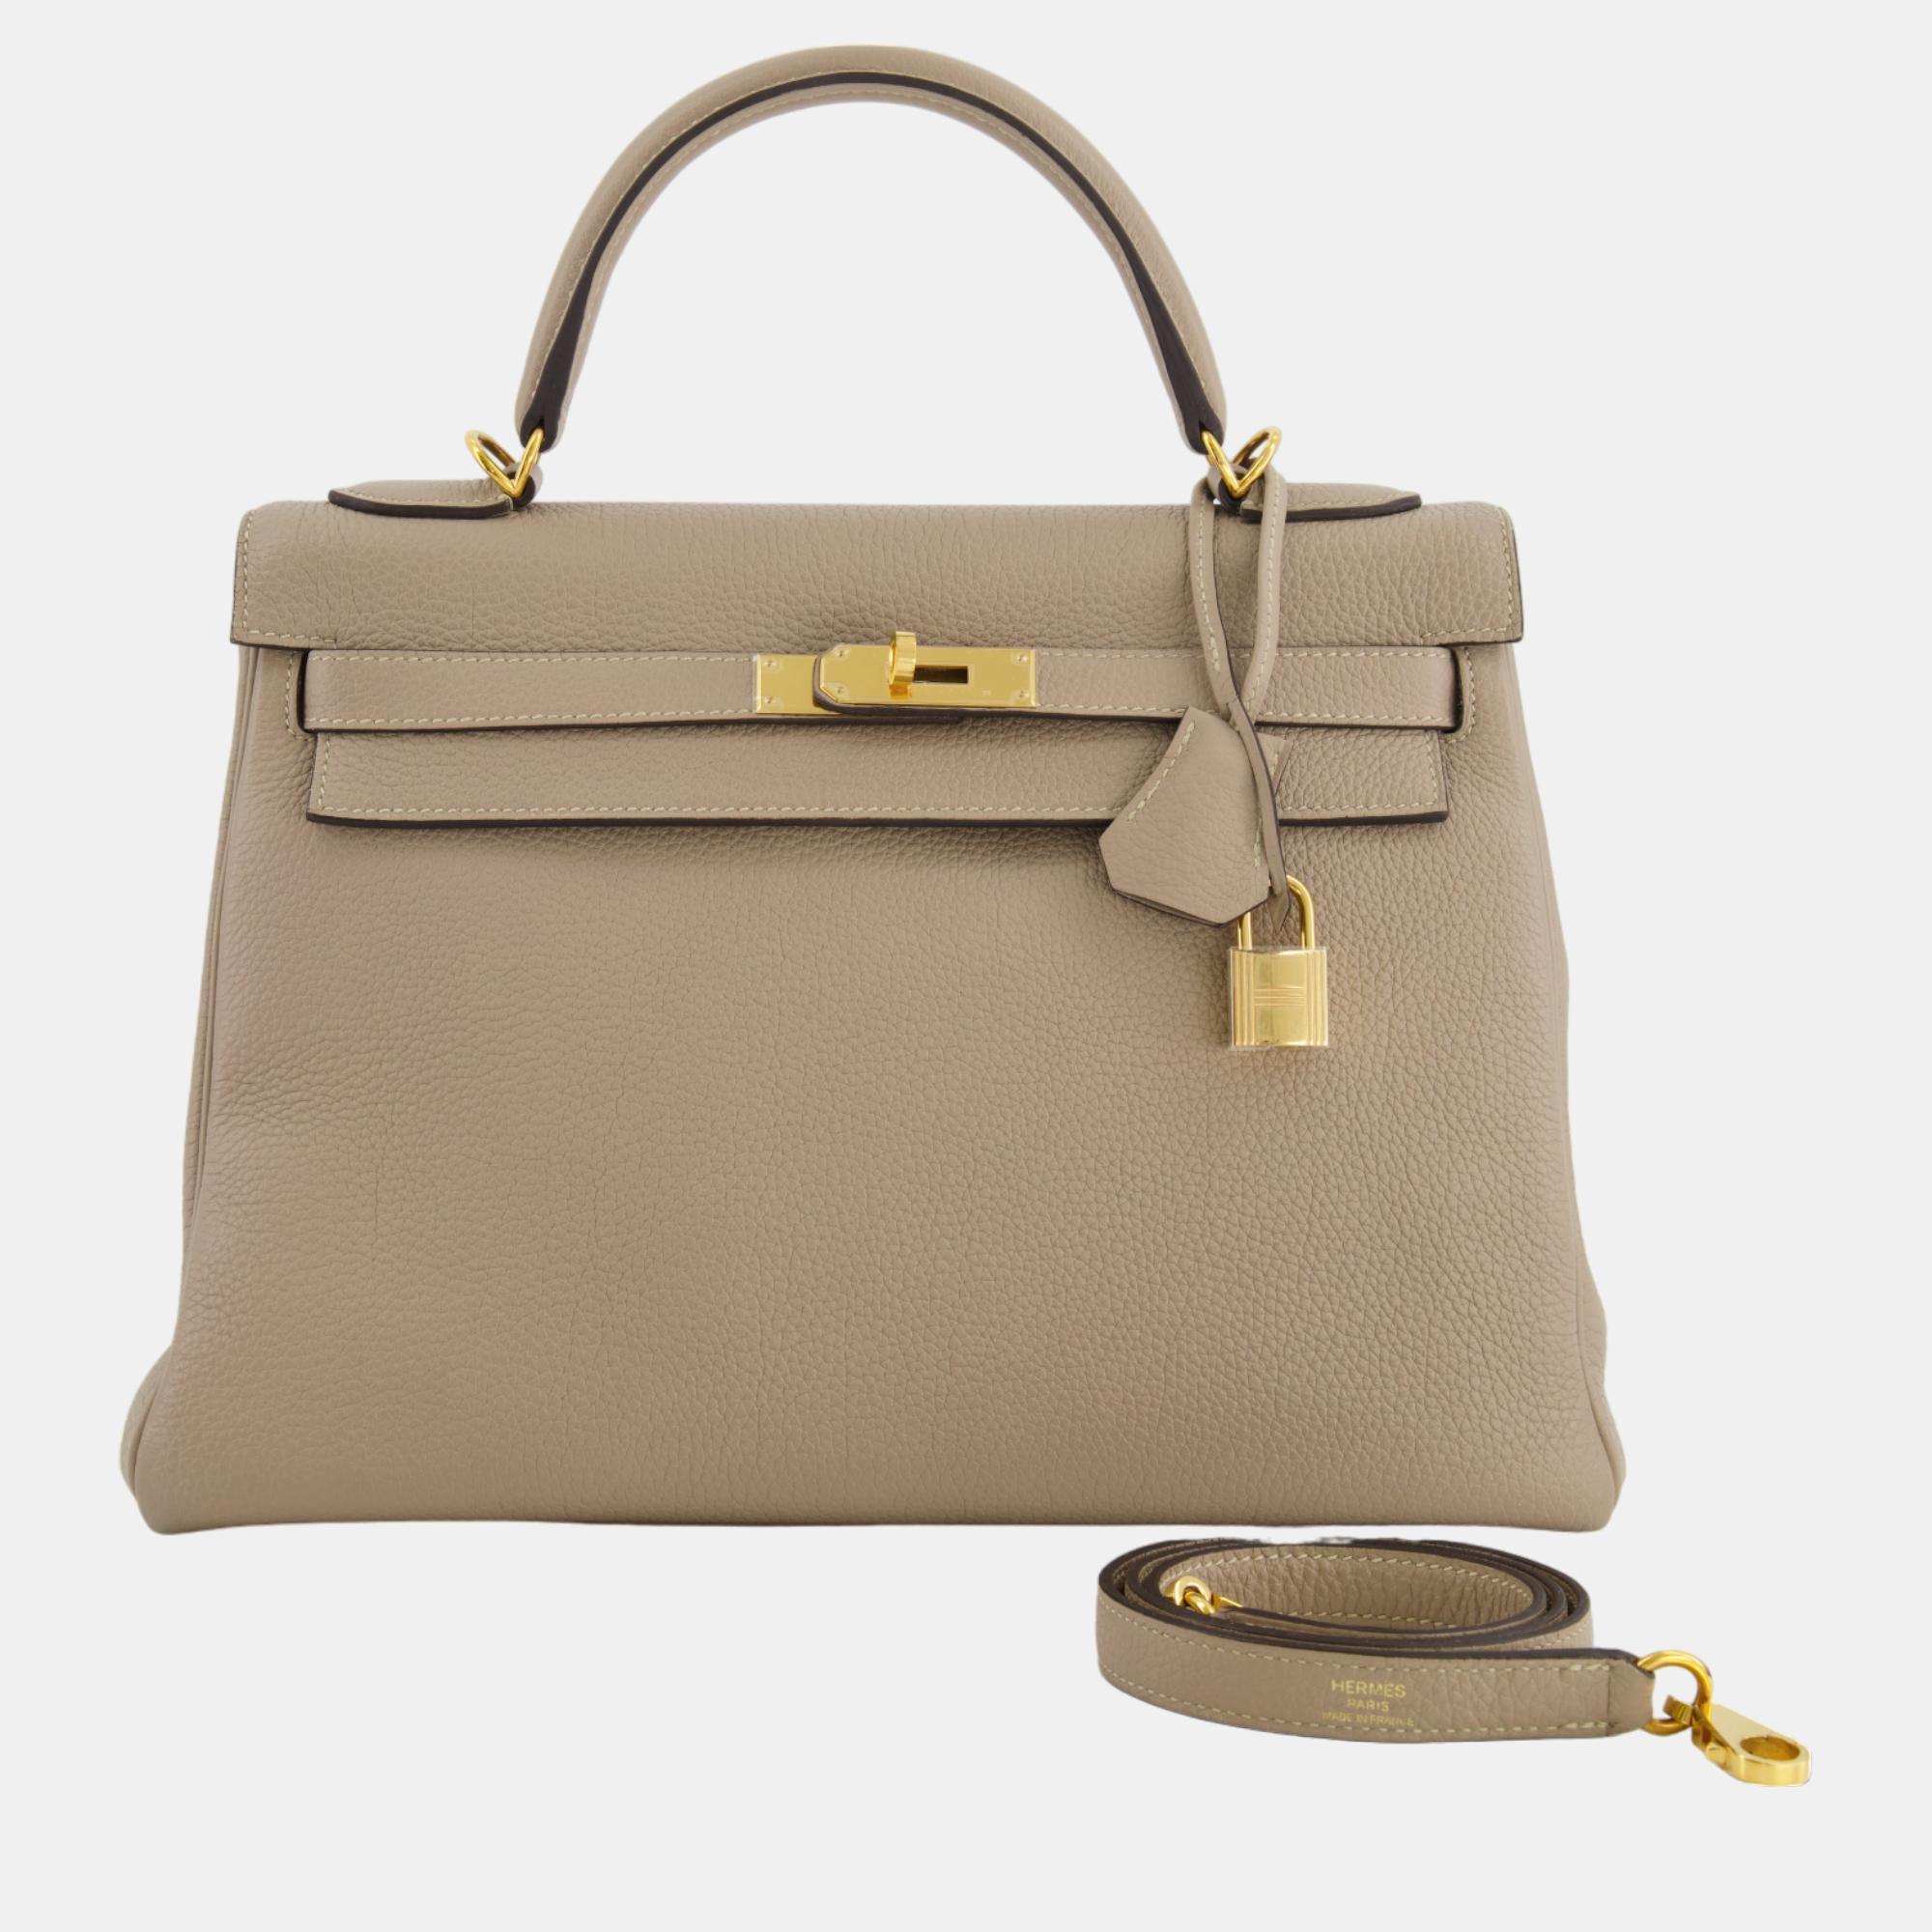 Hermes Kelly 32cm Bag In Gris Tourterelle Clemence Leather With Gold Hardware